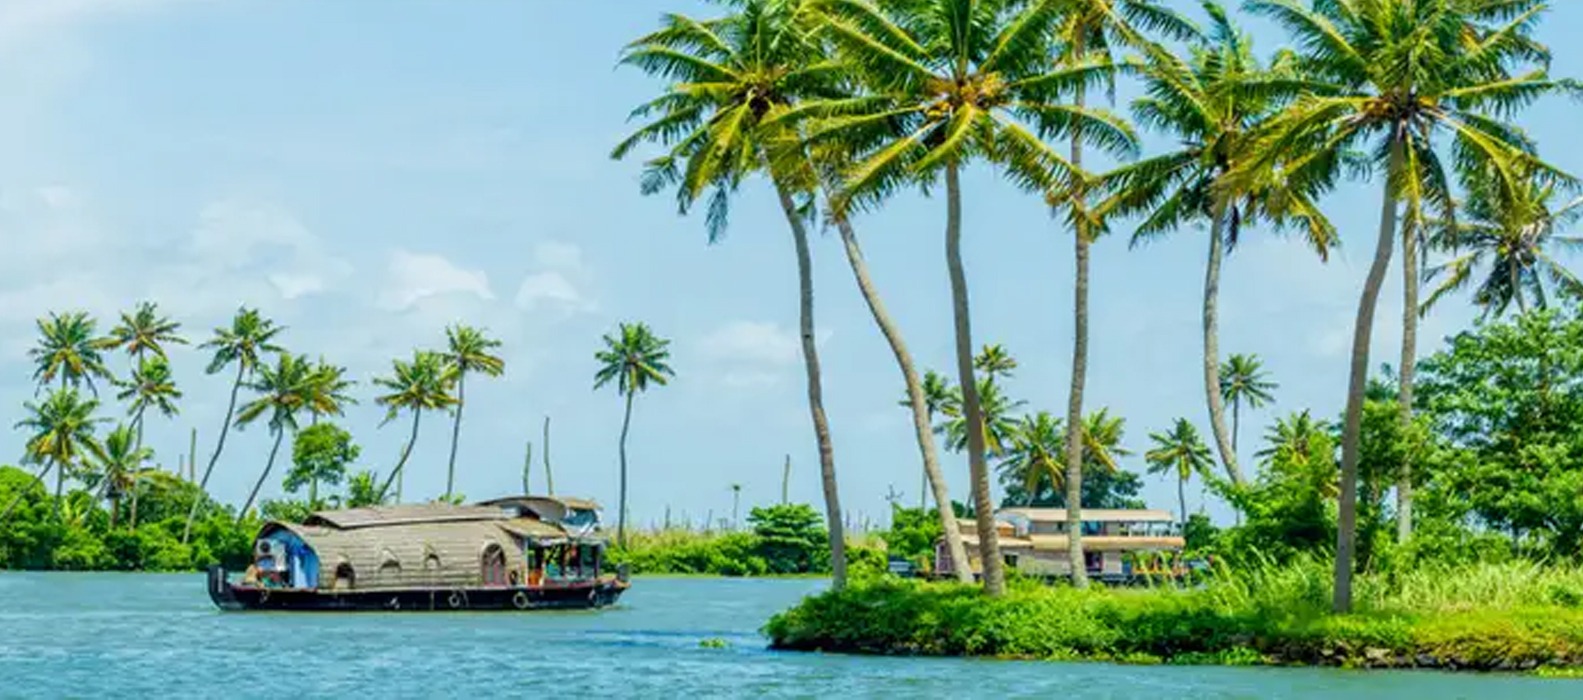 Kerala Honeymoon Packages -Affordable Package for Top Places